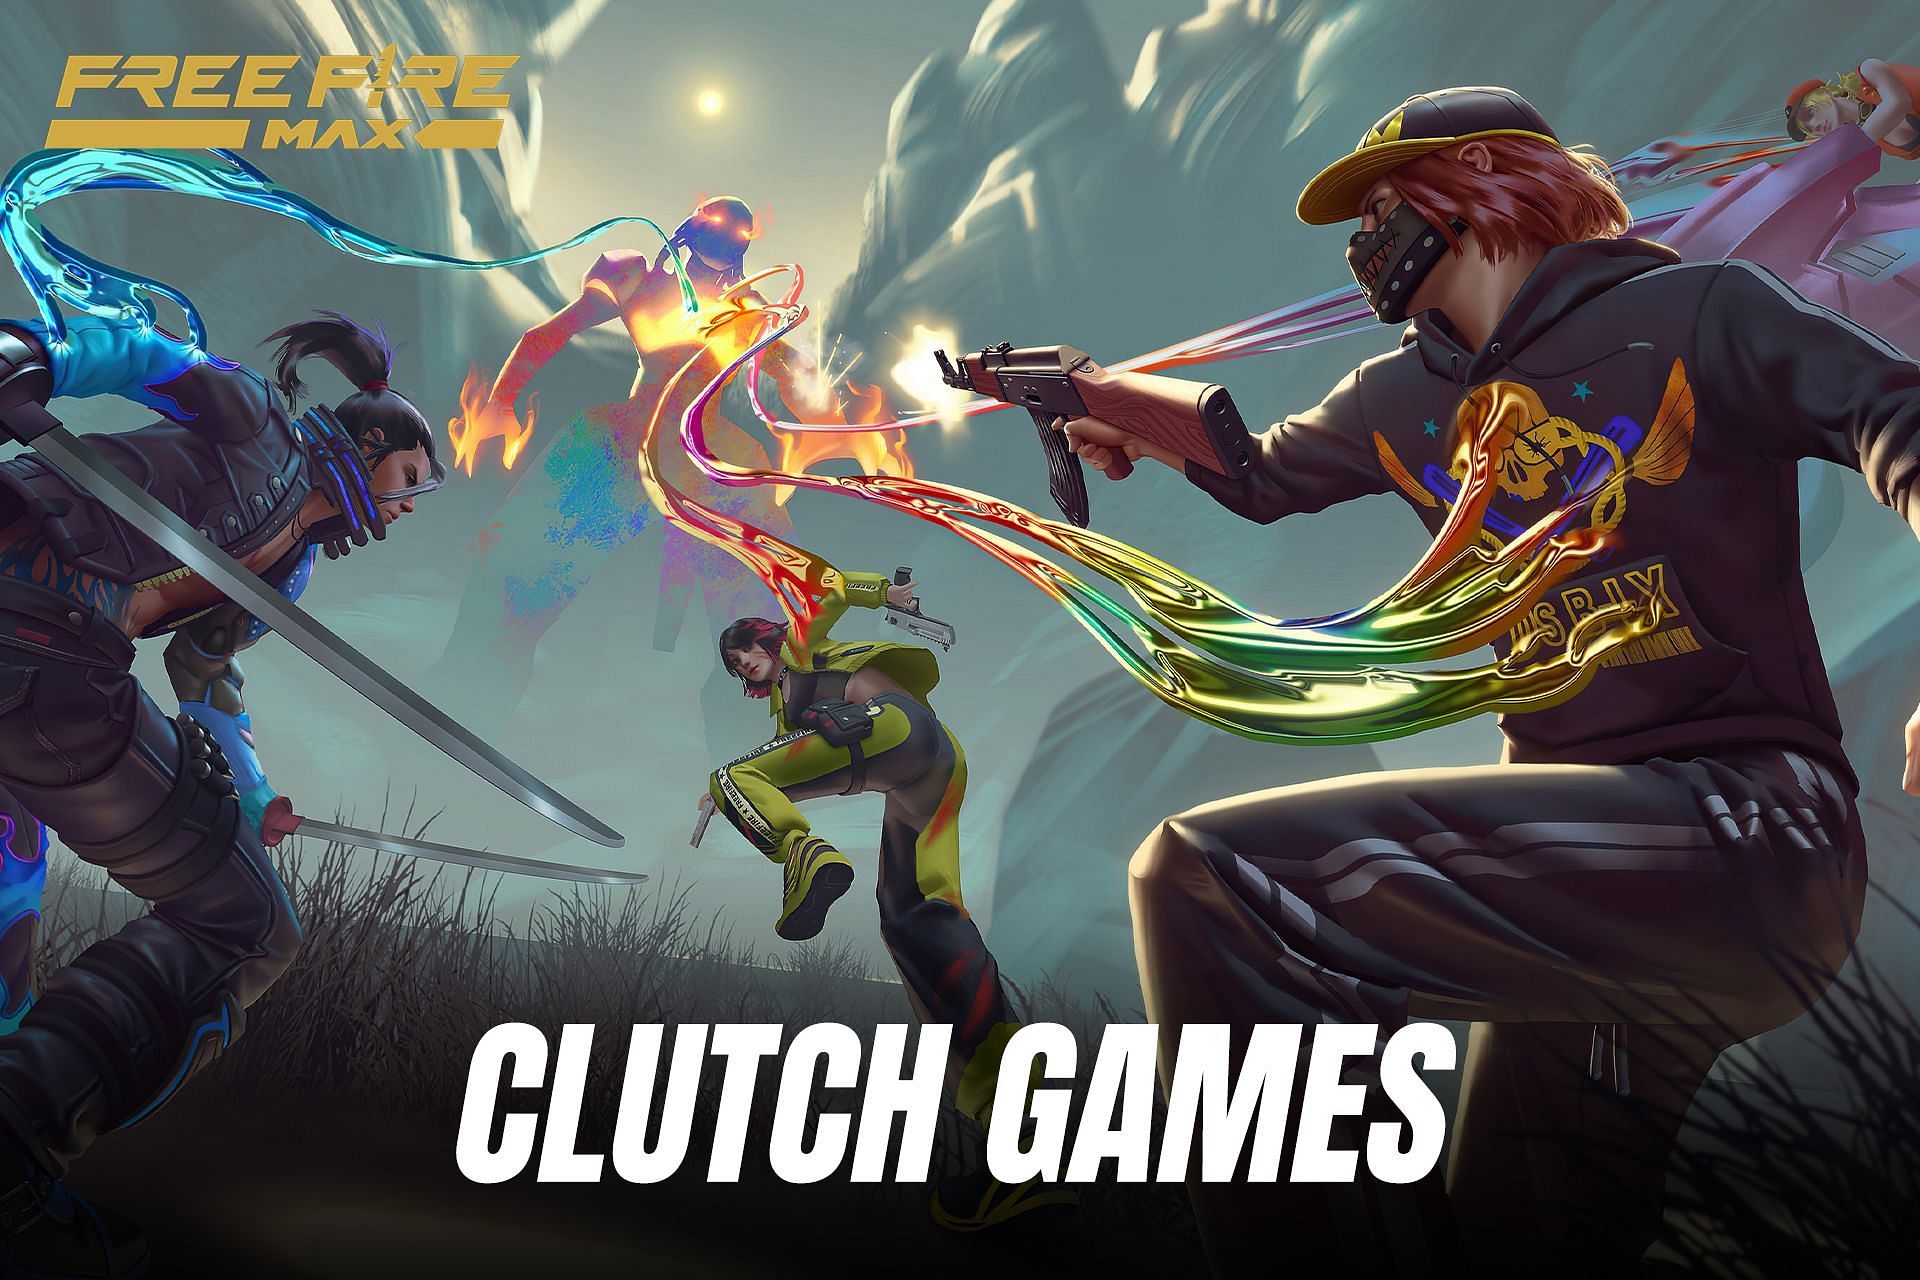 5 tips to clutch games in Free Fire MAX